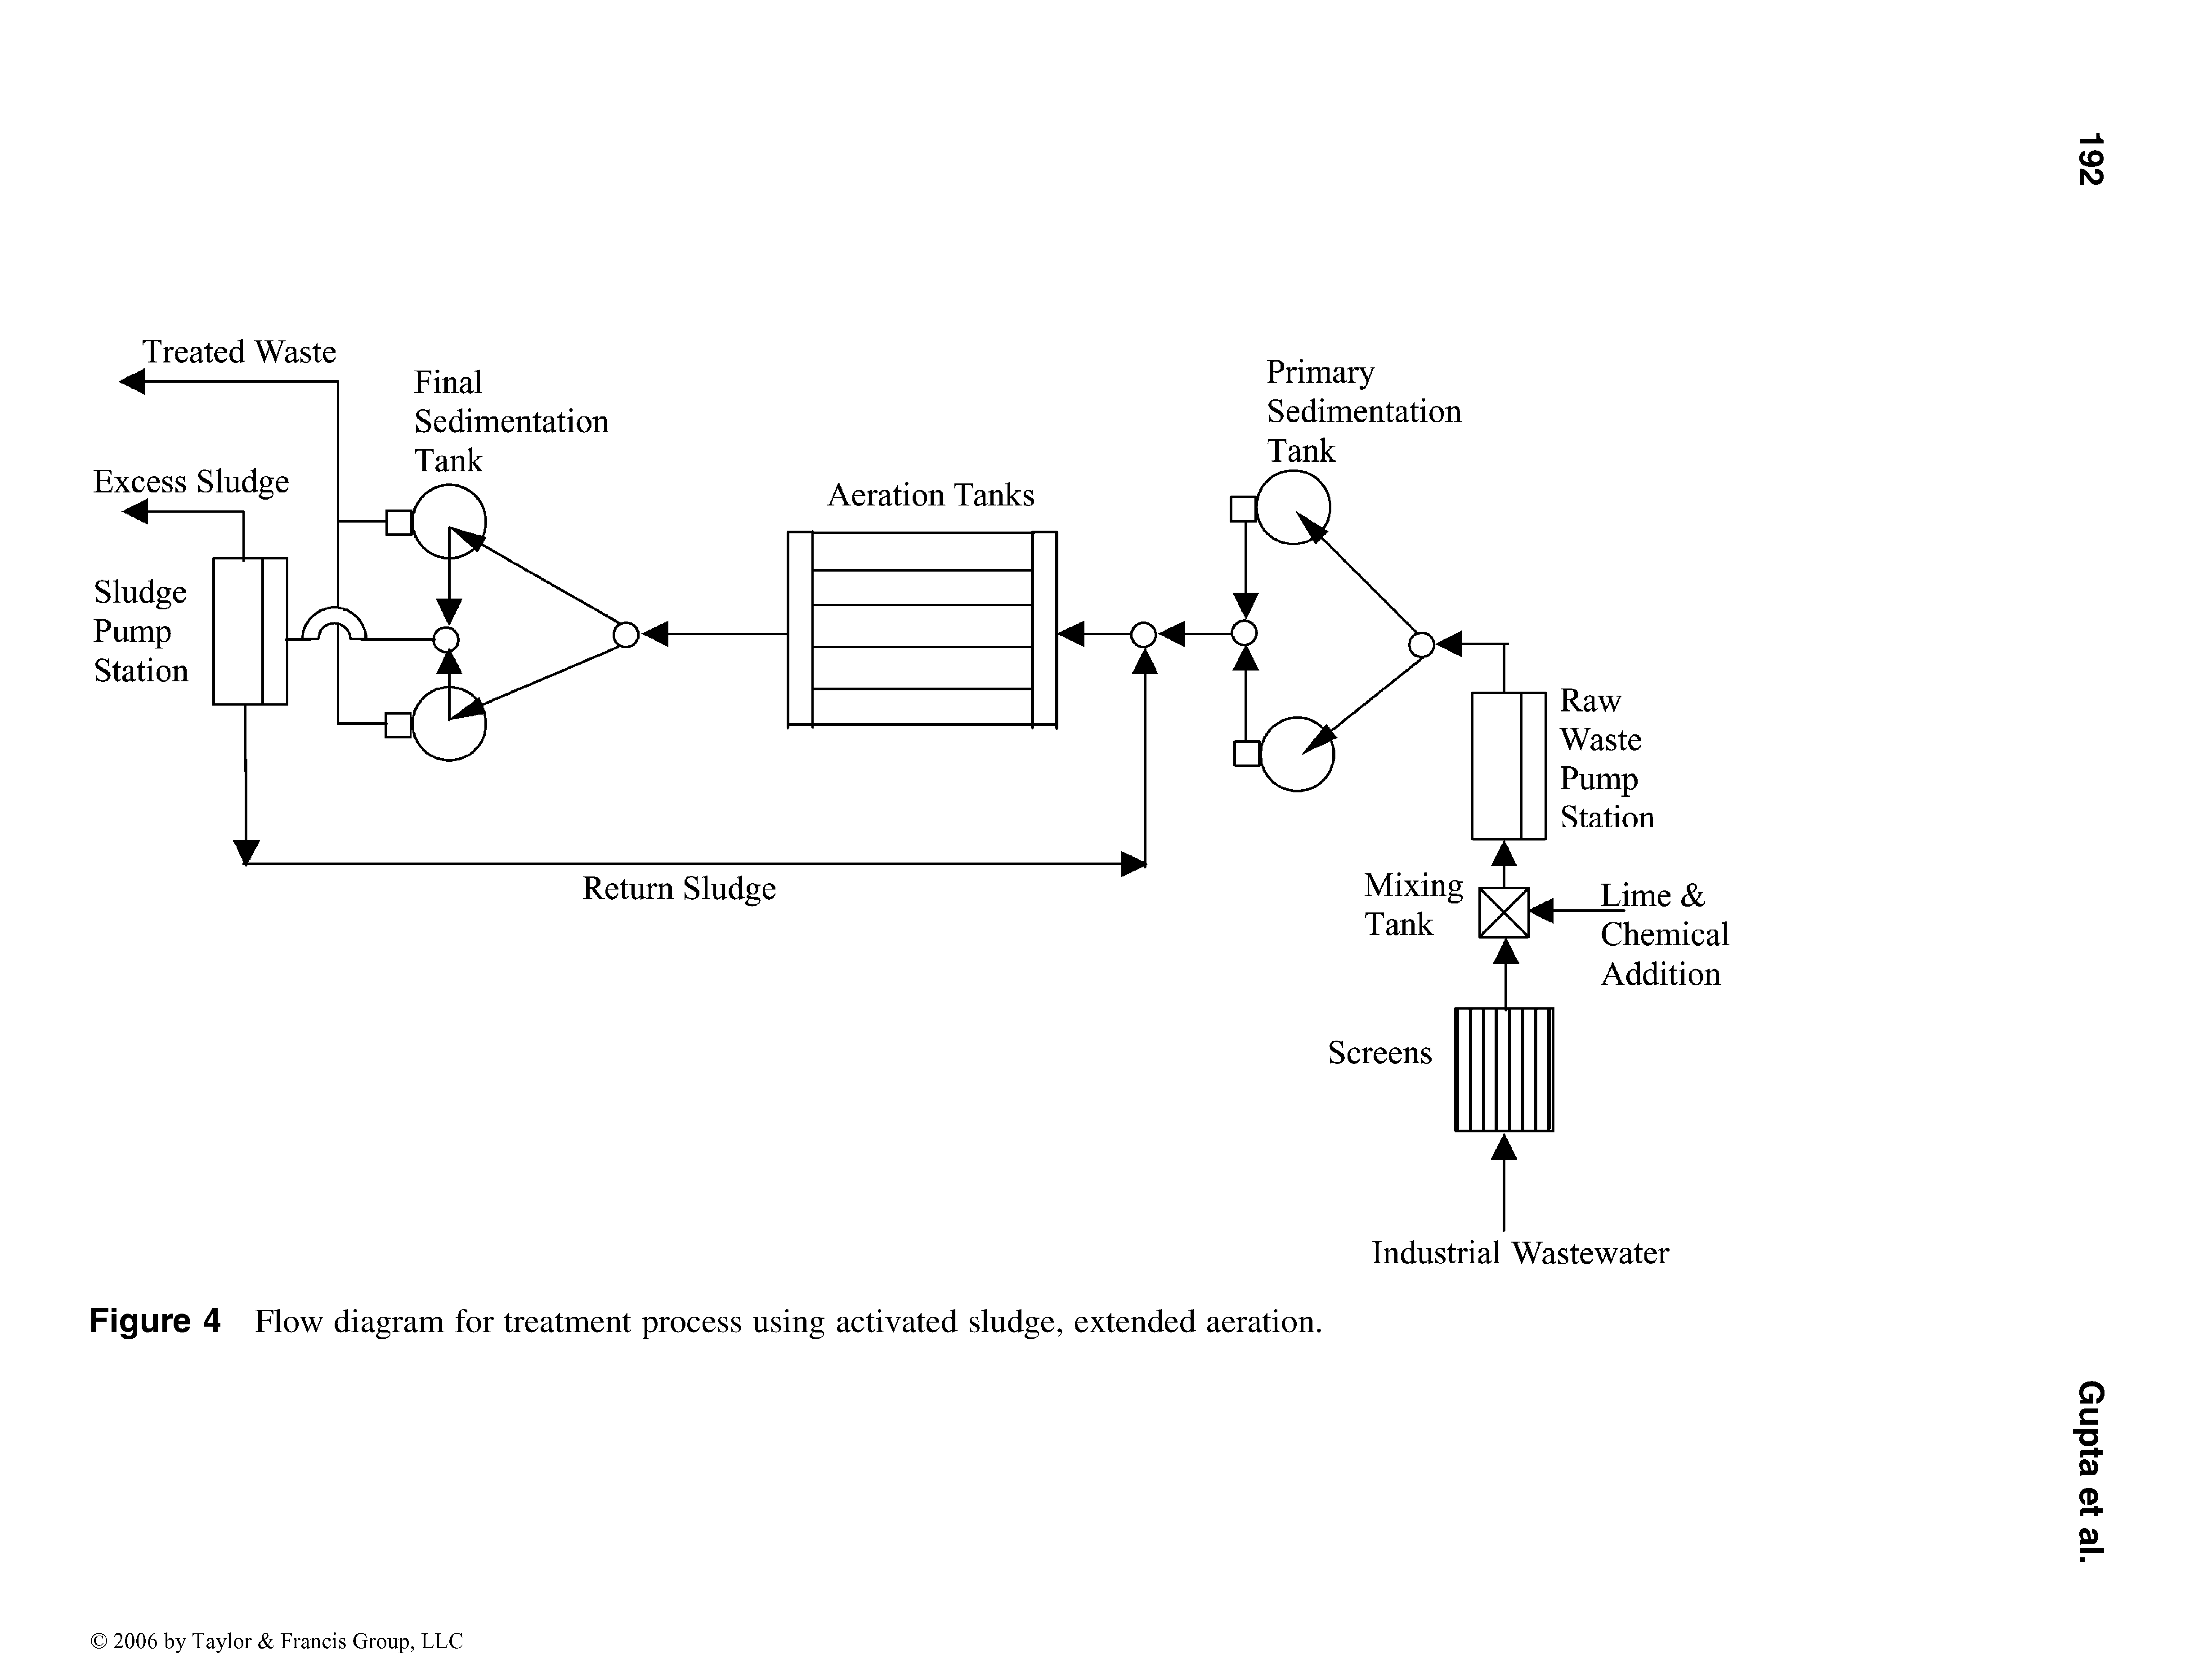 Figure 4 Flow diagram for treatment process using activated sludge, extended aeration.